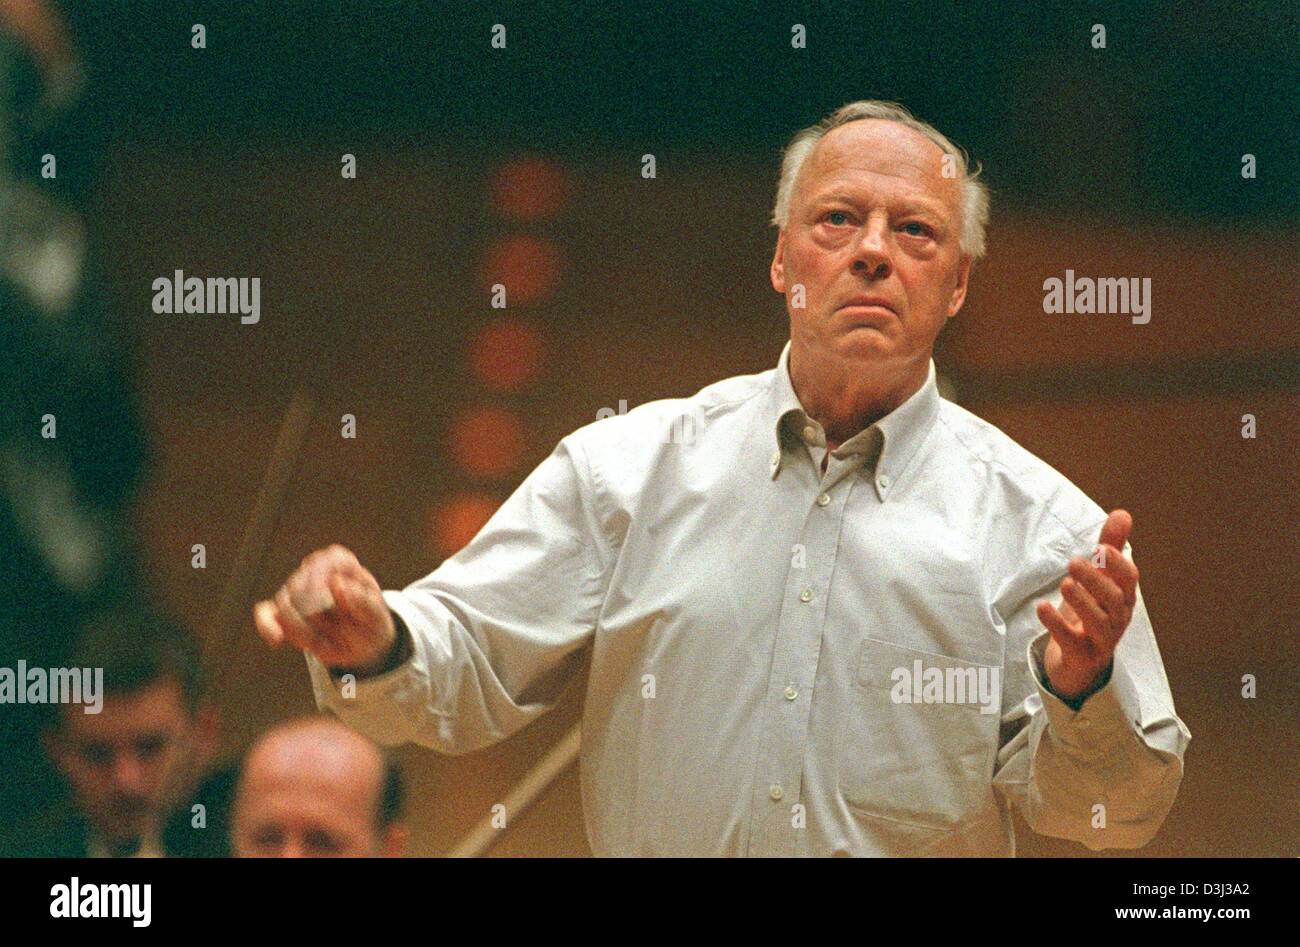 (dpa files) - Dutch conductor Bernard Haitink conducts the Vienna Philharmonists during a rehearsal at the Philharmonie concert hall in Cologne, Germany, 7 May 2003. Bernard Haitink, born in Amsterdam in 1929, studied conducting with Felix Hupka and Ferdinand Leitner. In 1957, he was appointed conductor of the Radio Philharmonic Orchestra. He became joint chief conductor of the Con Stock Photo